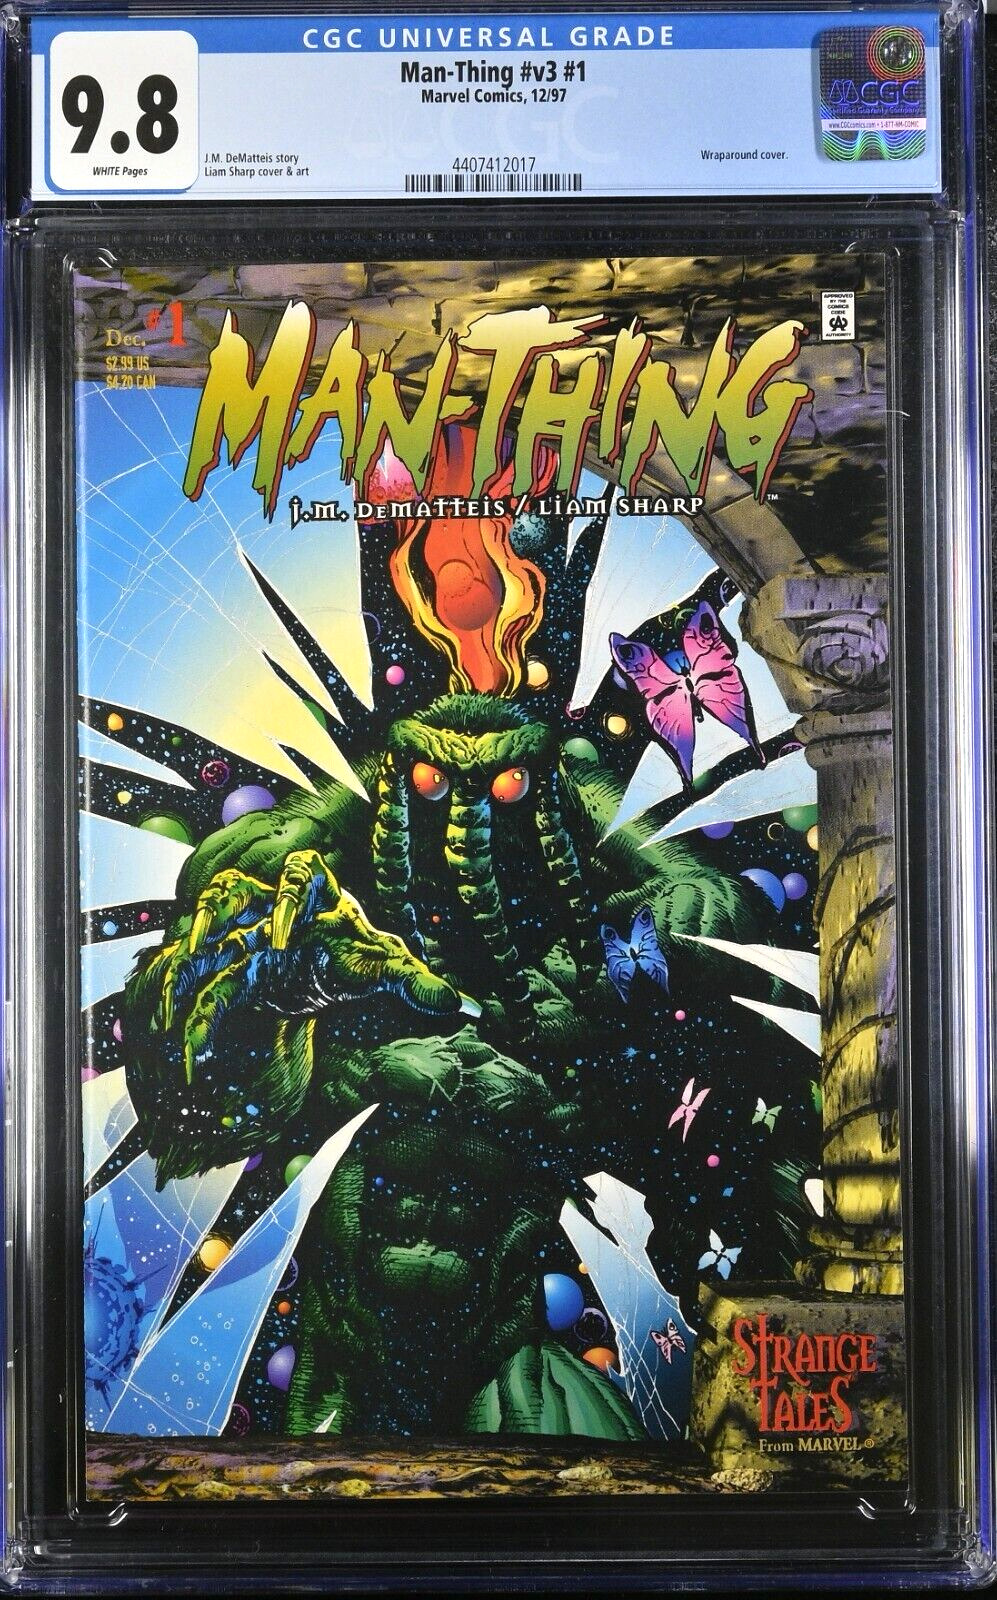 MAN-THING #1 [1997] - CGC 9.8 - Marvel Comics - White Pages - Wraparound Cover